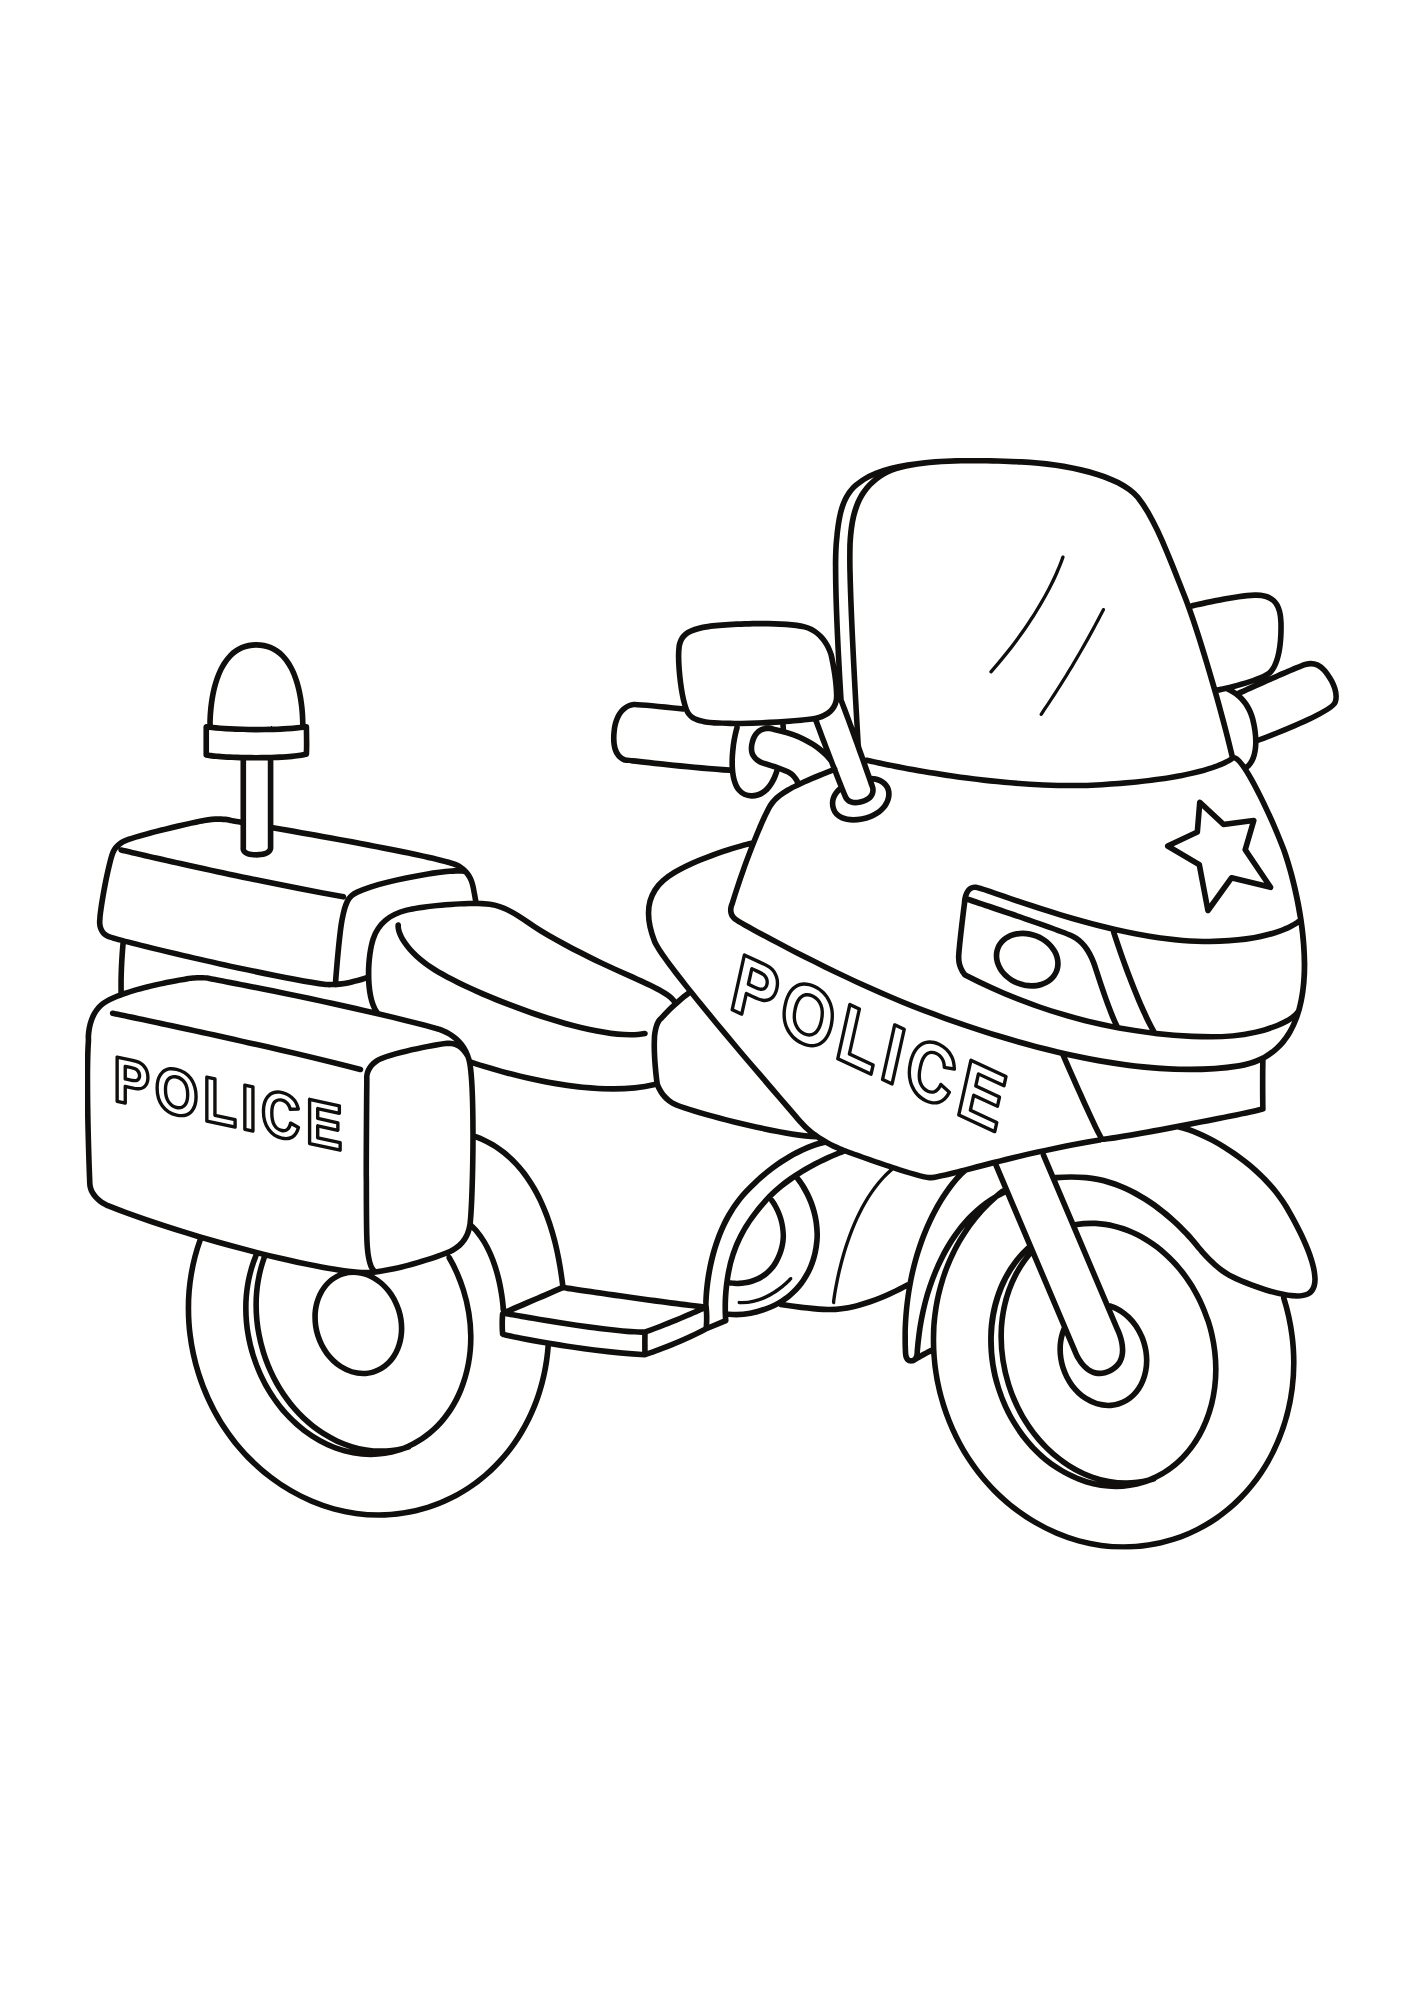 Police Motorcycle Coloring Page for Kids